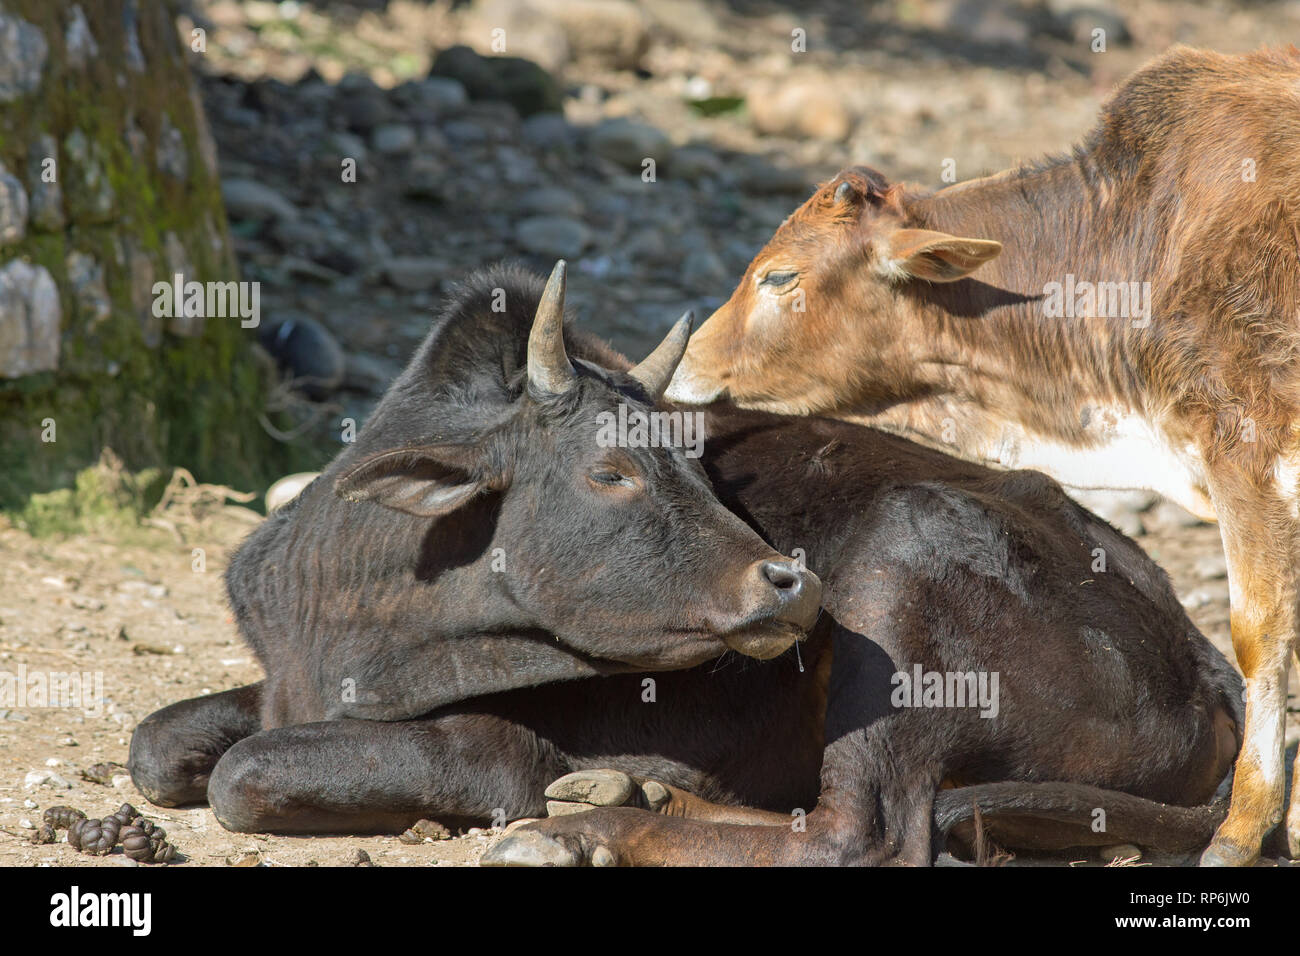 Young Zebu type, humped back cattle, each seeking a response from the other. Interactive play and self-recognition being exacted from the other. India. Stock Photo